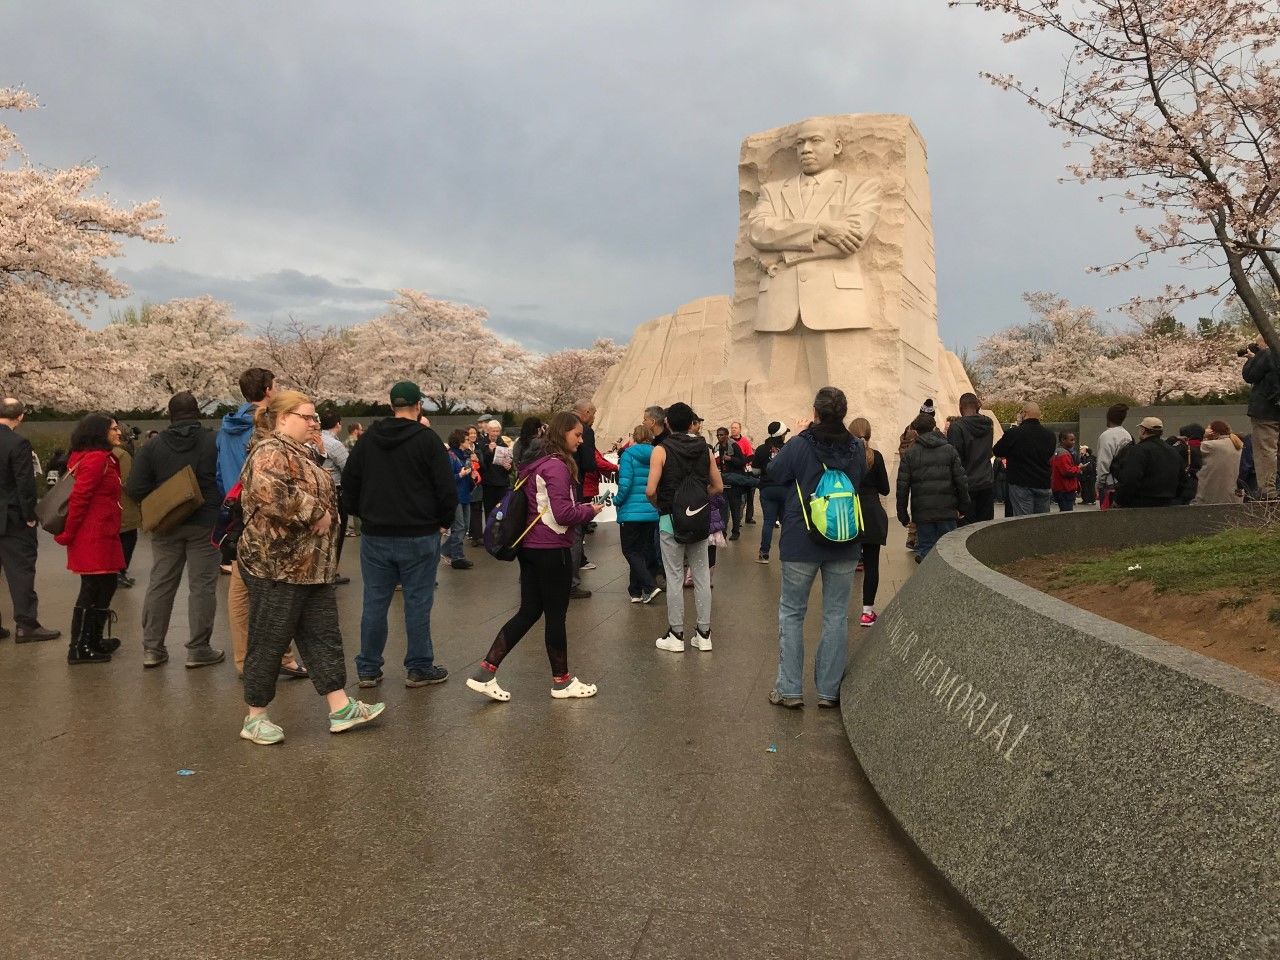 Visitors to the MLK, Jr. Memorial are discussing King's eloquence and ability to mobilize people of many backgrounds. (WTOP/Neal Augenstein)